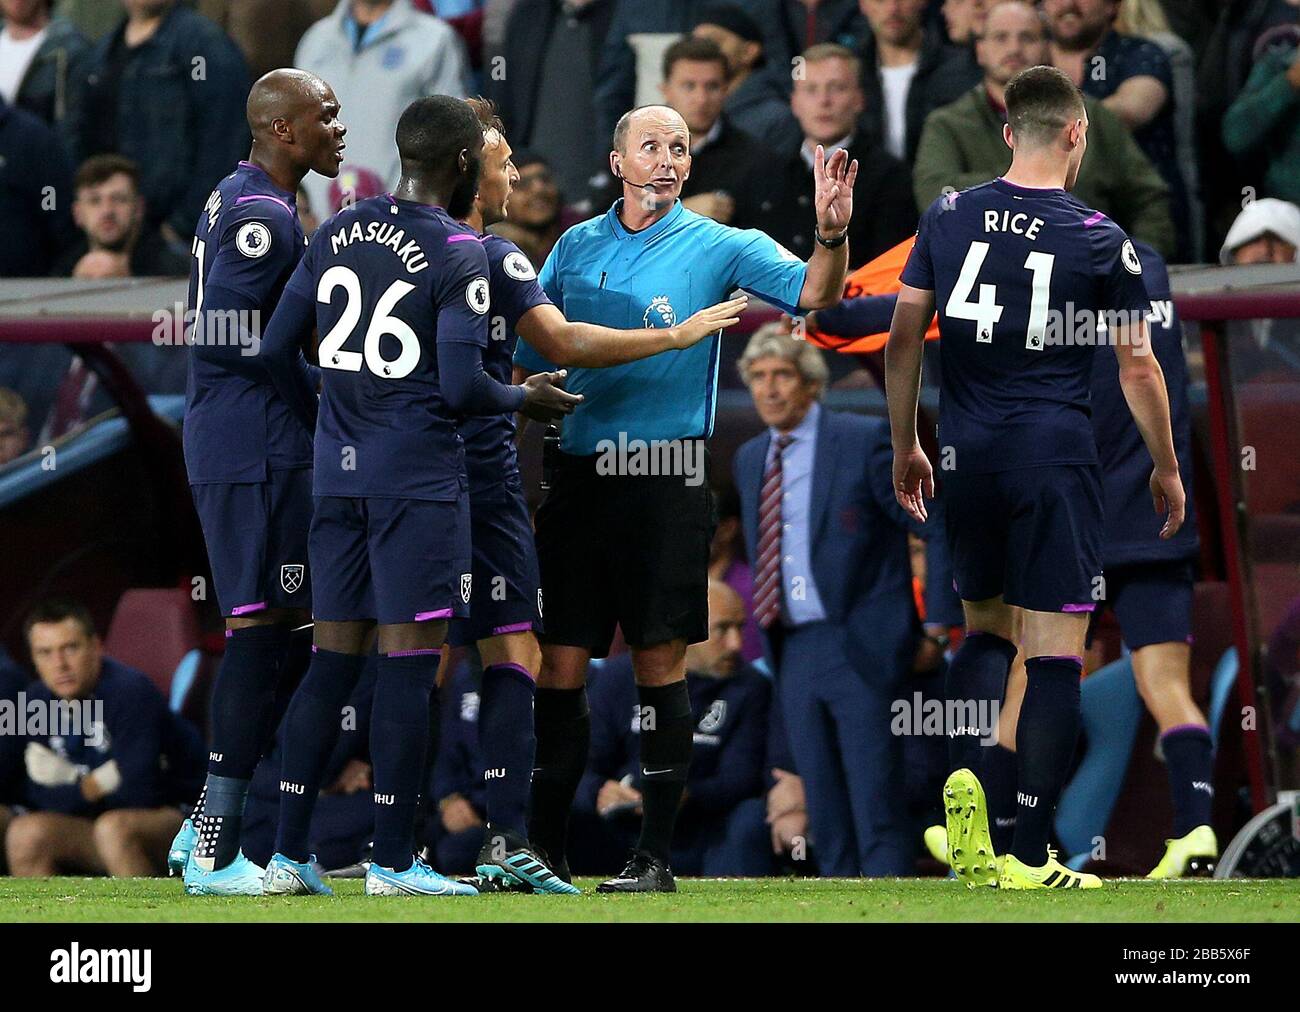 West Ham United's Arthur Masuaku (26) appeals to referee Mike Dean after being shown a red card Stock Photo